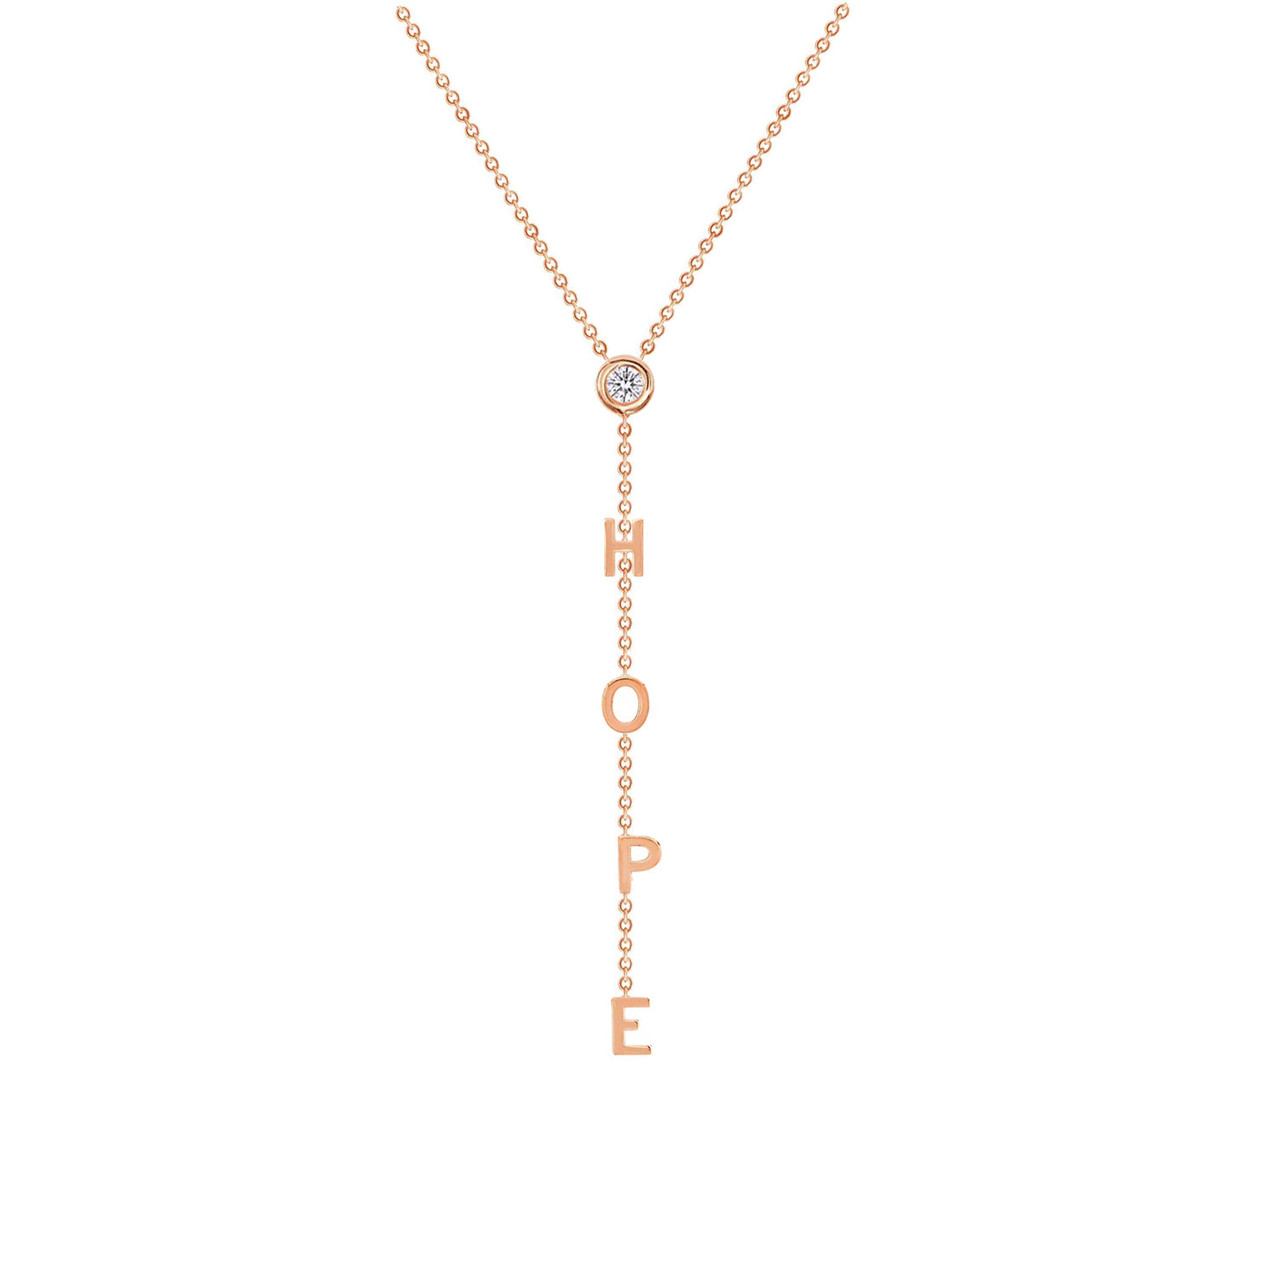 Drop monogram lariat necklace with sideways heart symbol - personalize it  with your initials.